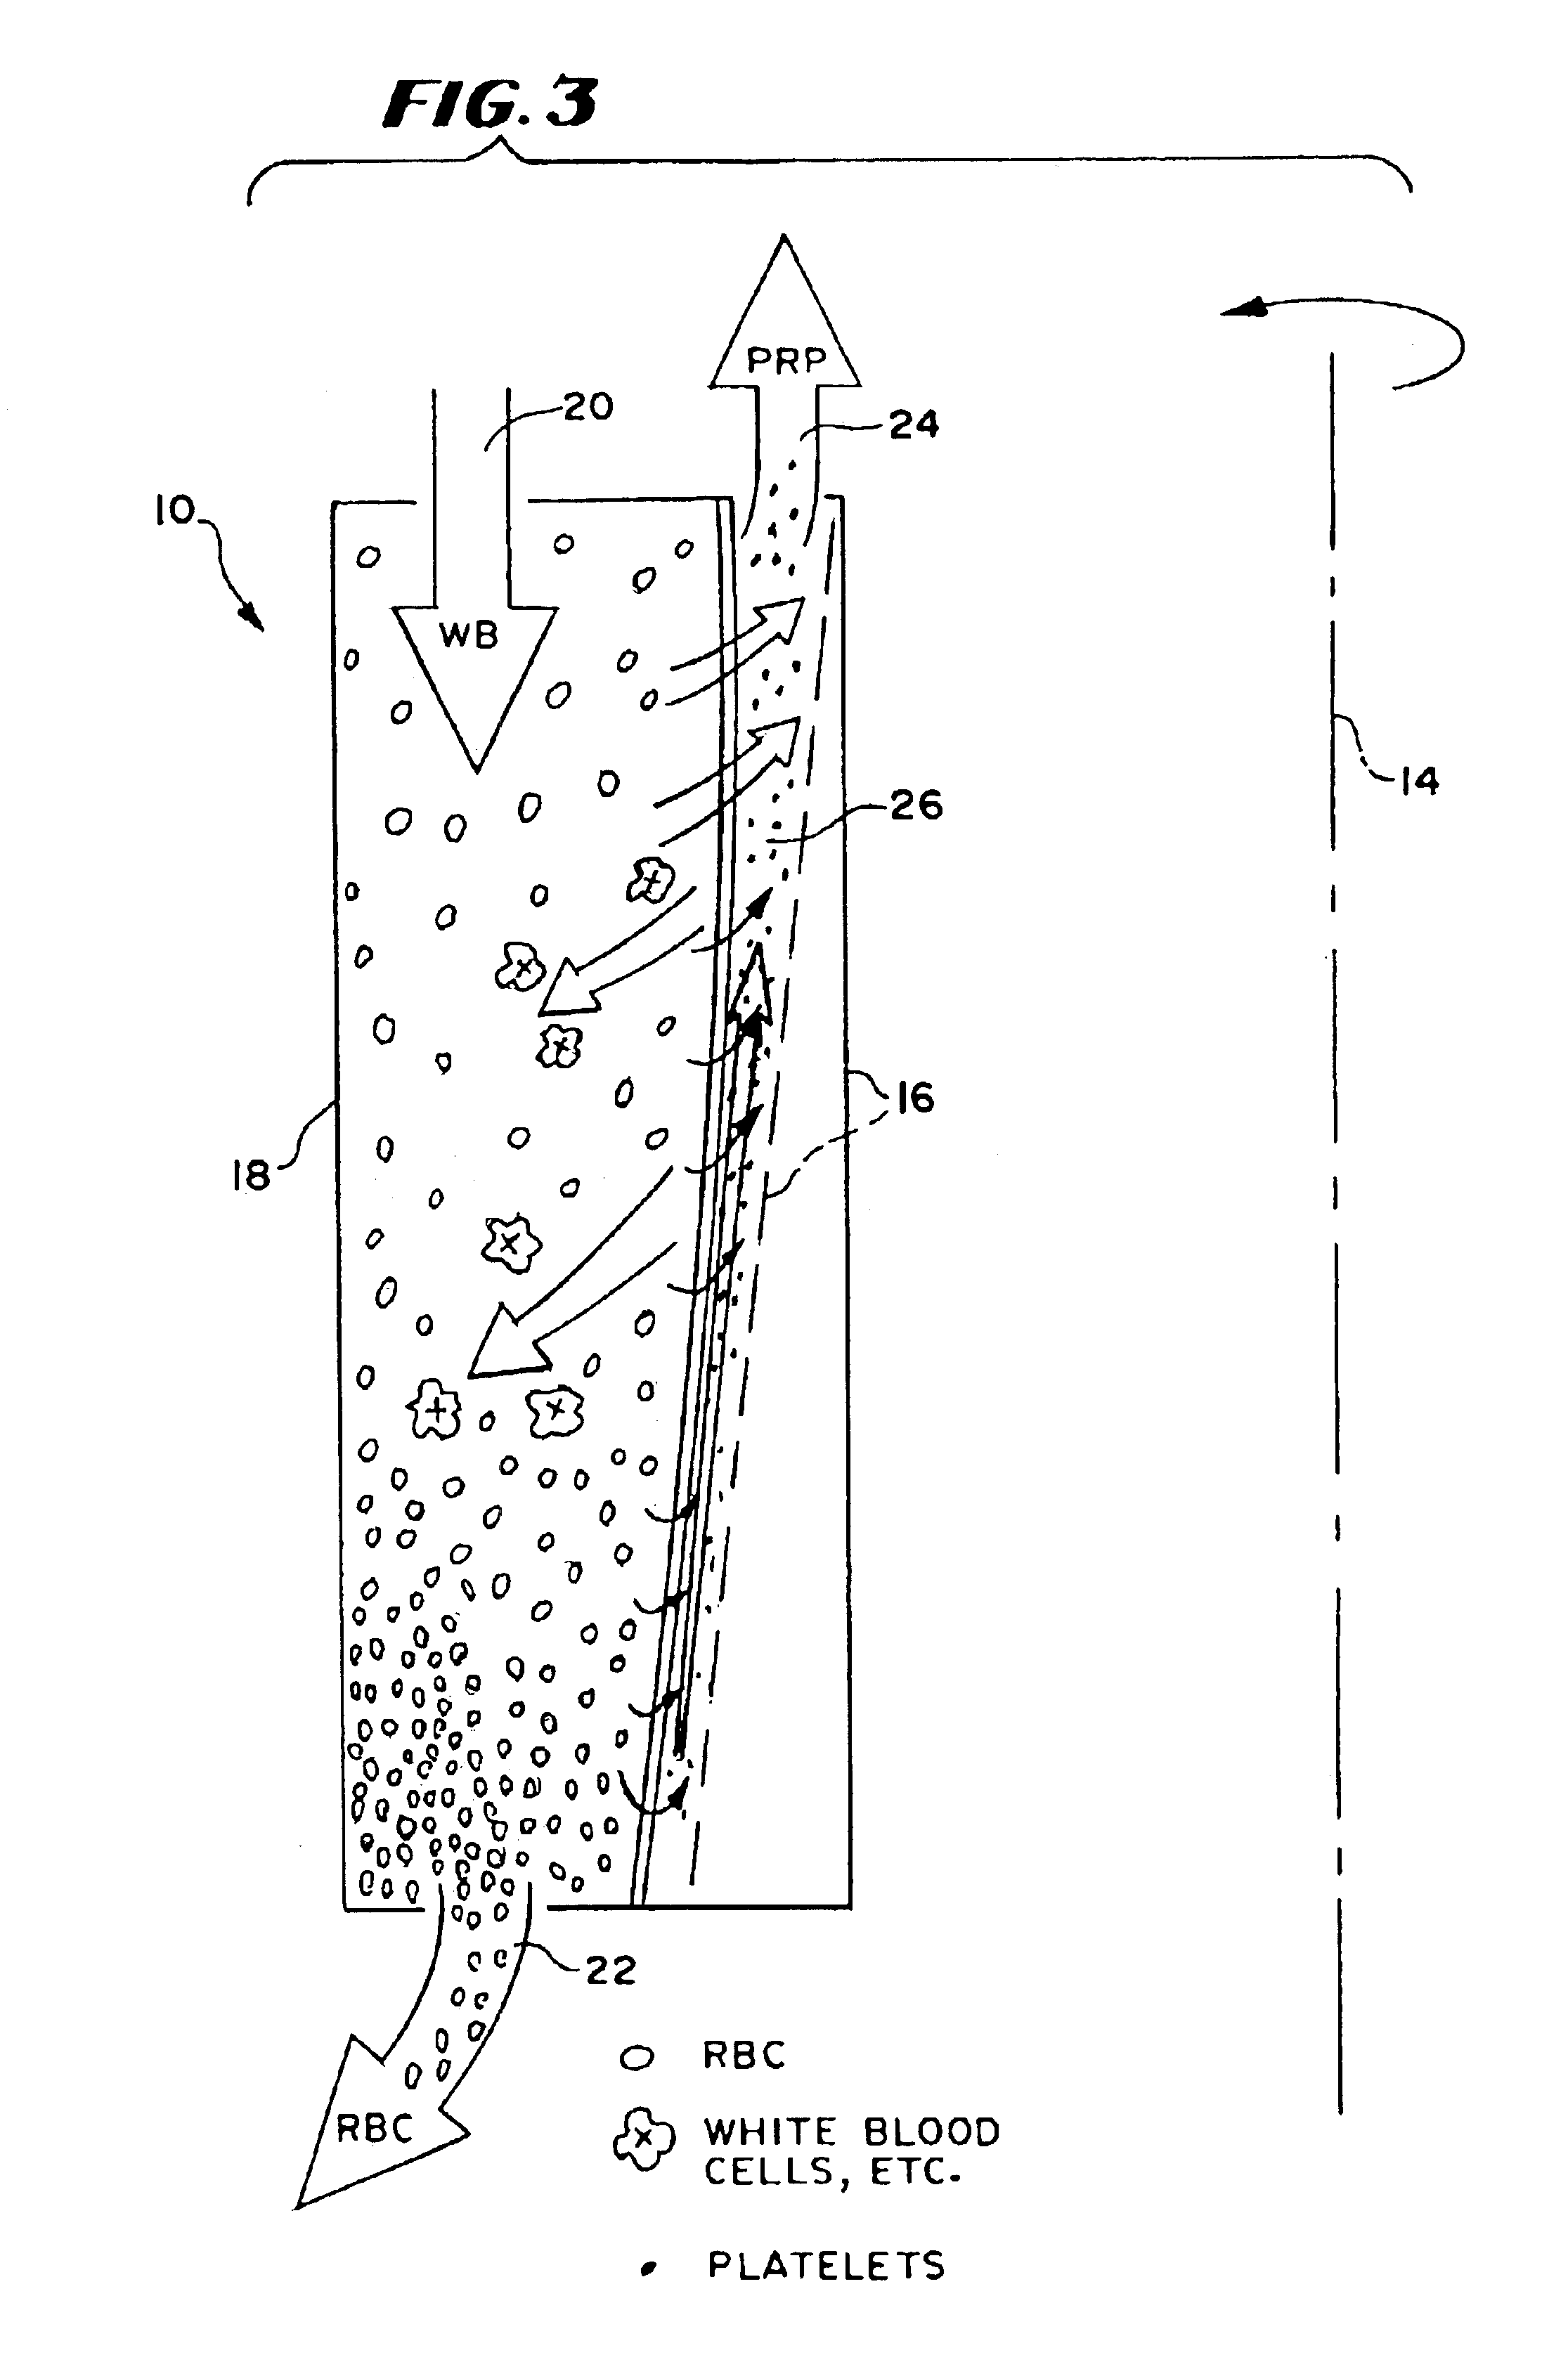 Blood processing systems and methods